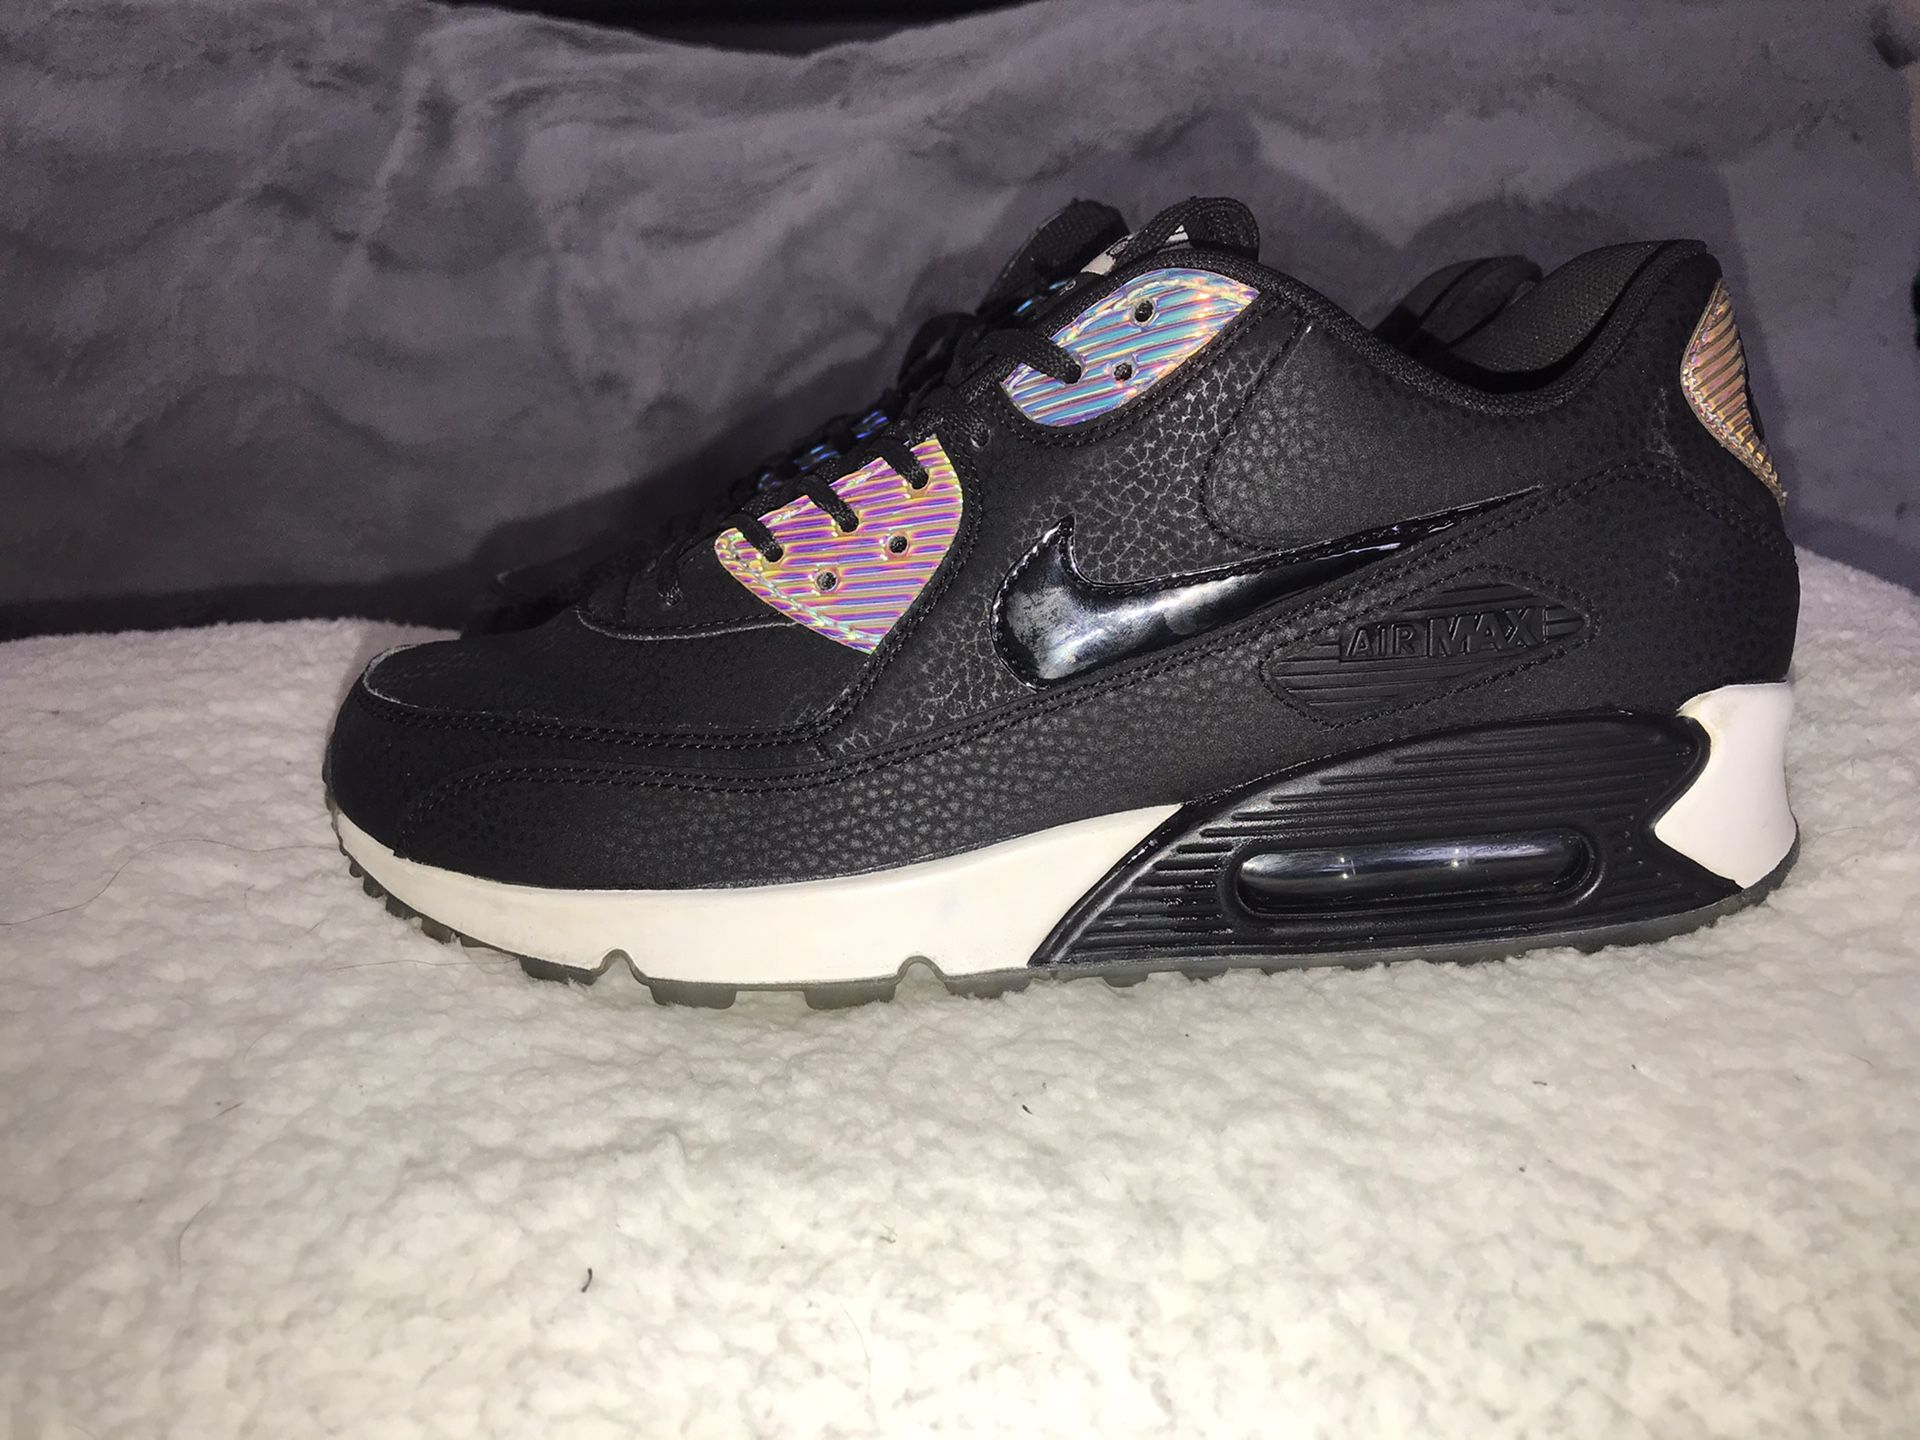 Nike Air Max 90 SOLD OUT